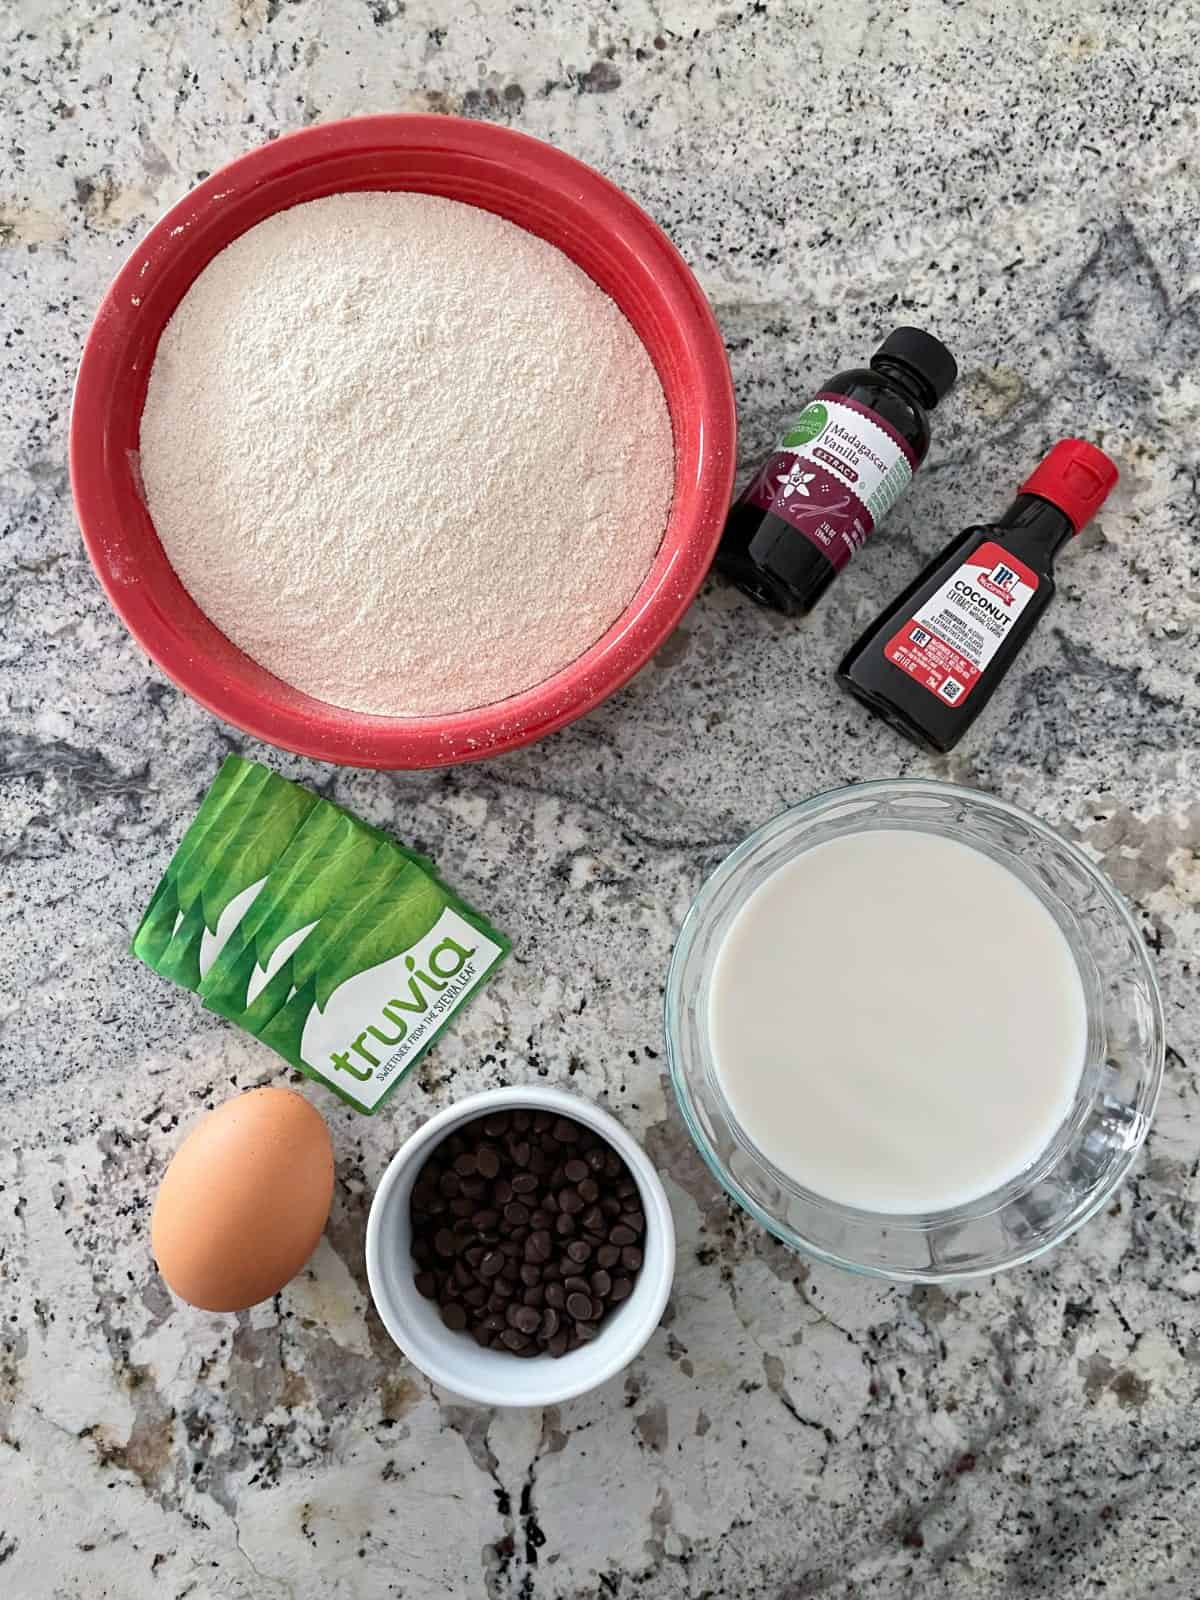 Ingredients including Kodiak Cakes mix, Truvia packets, egg, mini chocolate chips, almond milk, vanilla and coconut extract on granite.